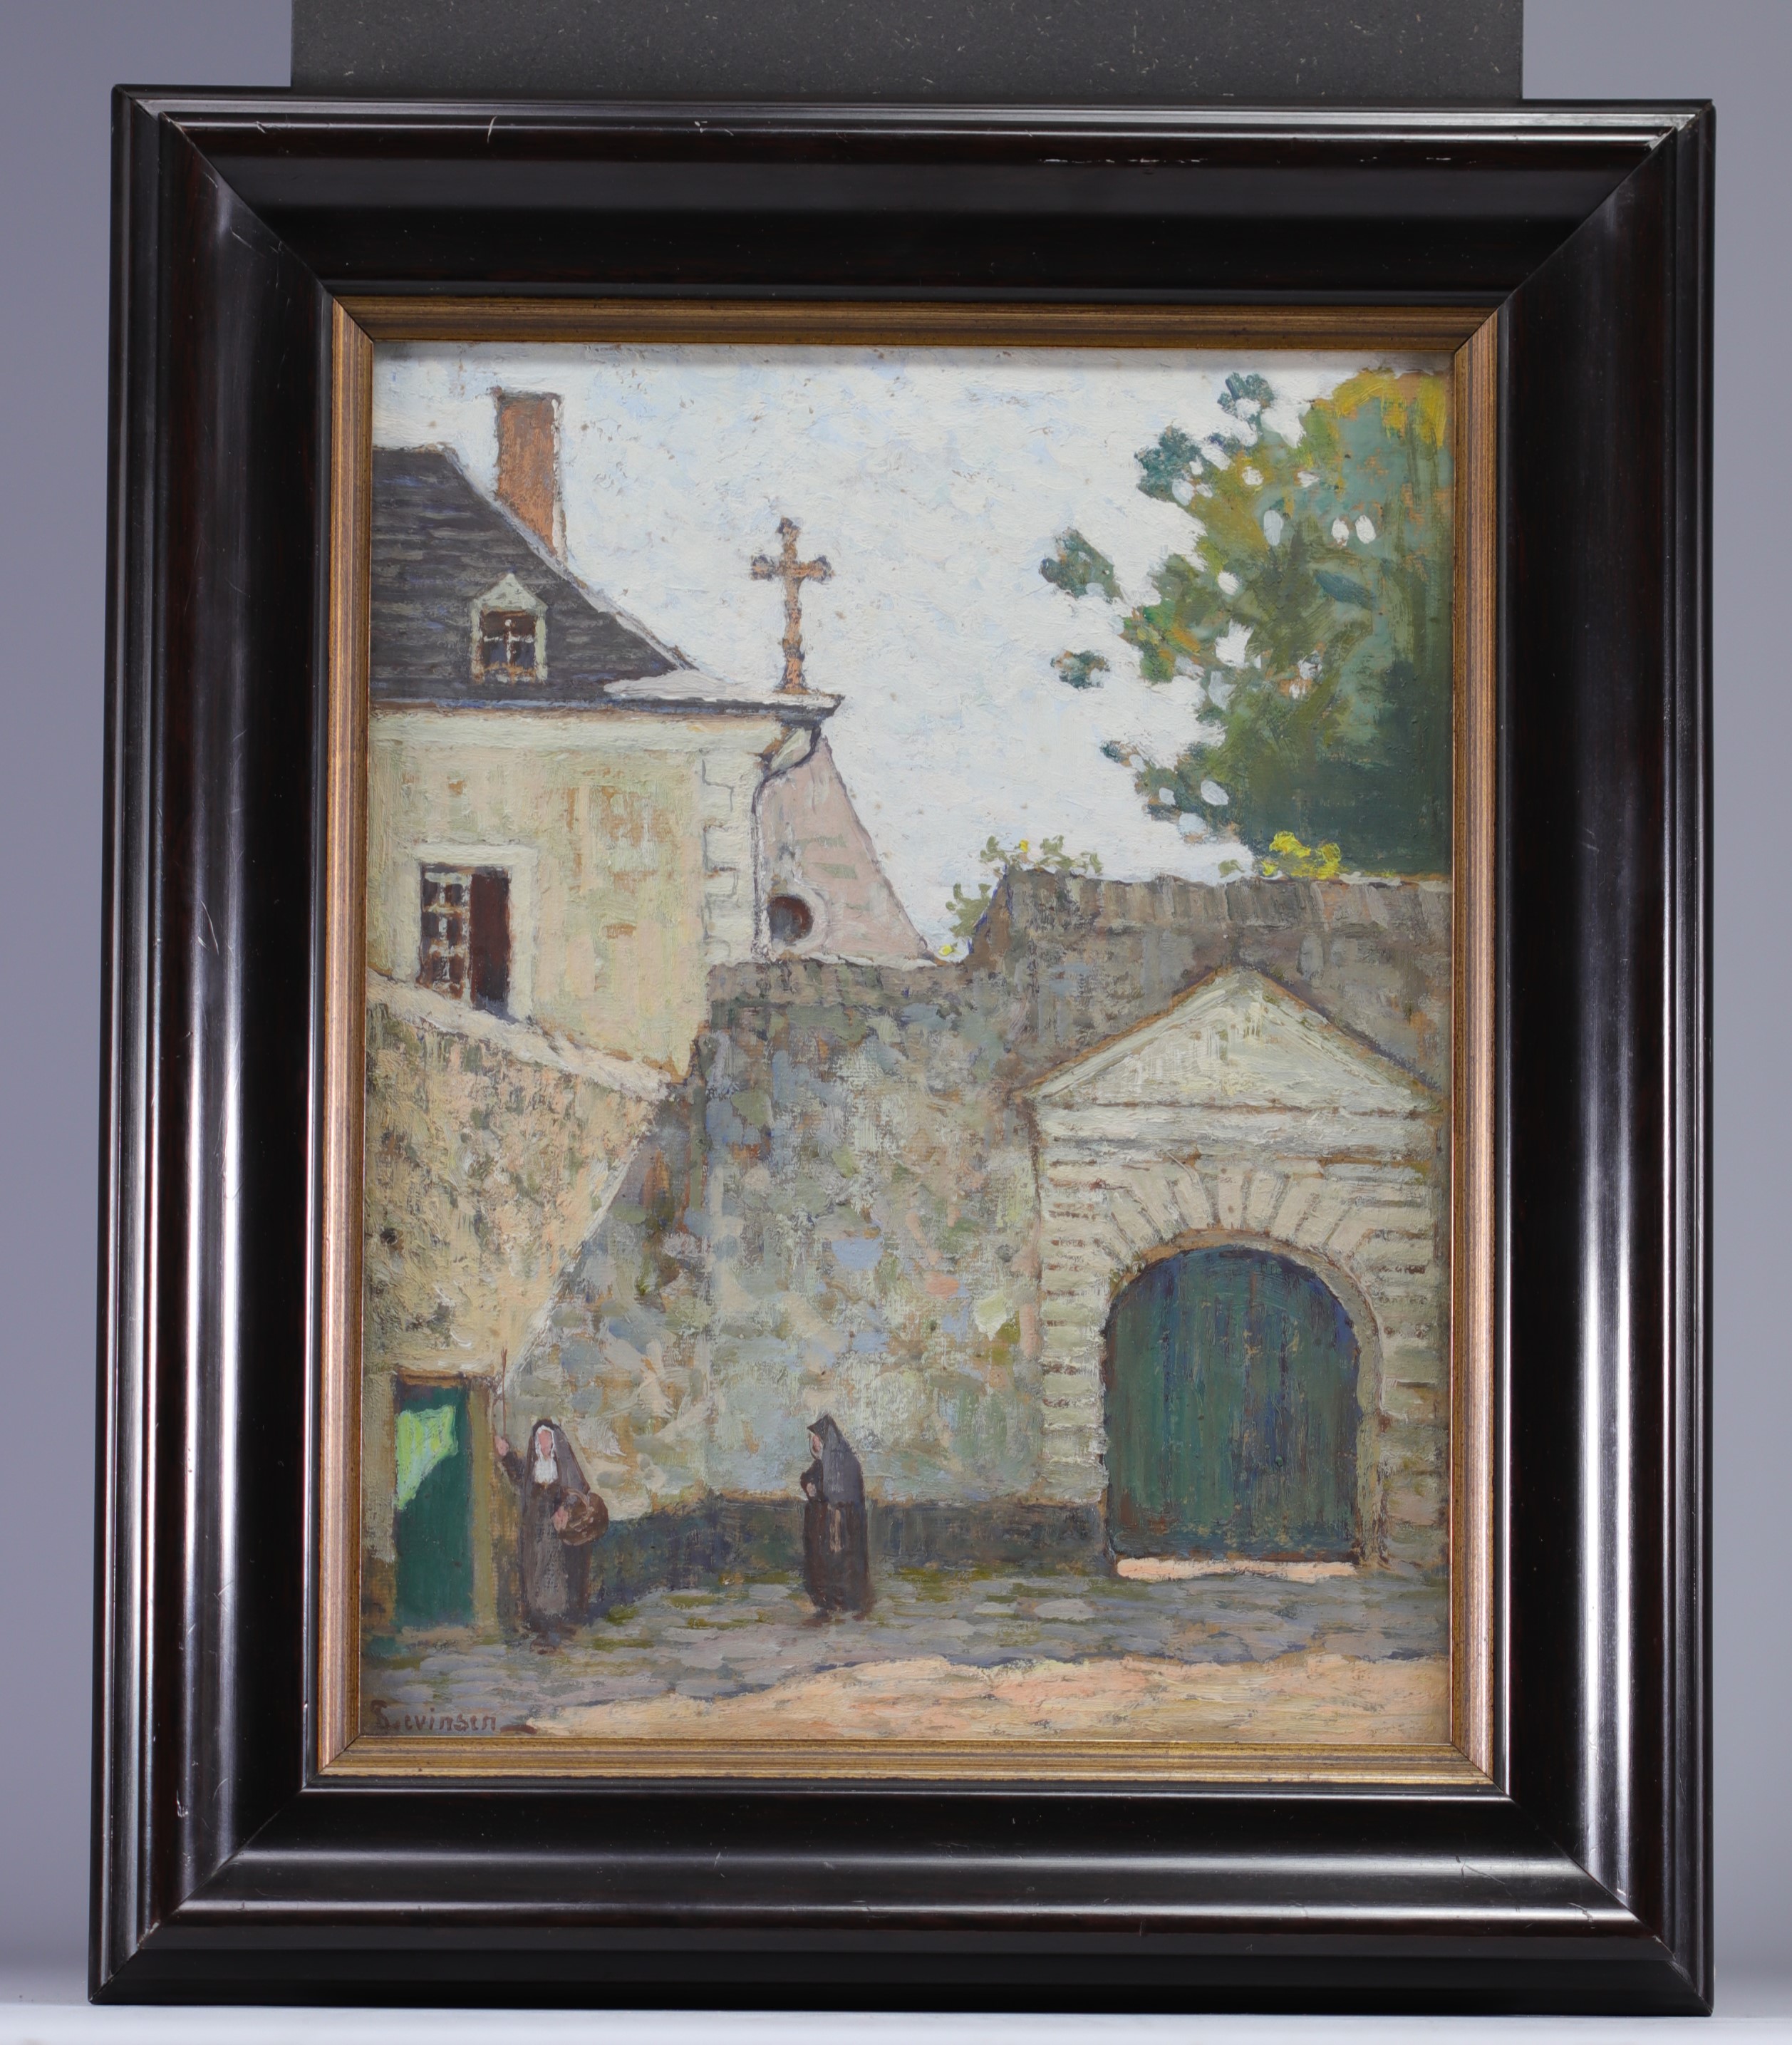 Sophus Theobald LEVINSEN (1869-1943) Oil painting "Cloister" signed lower left - Image 2 of 2